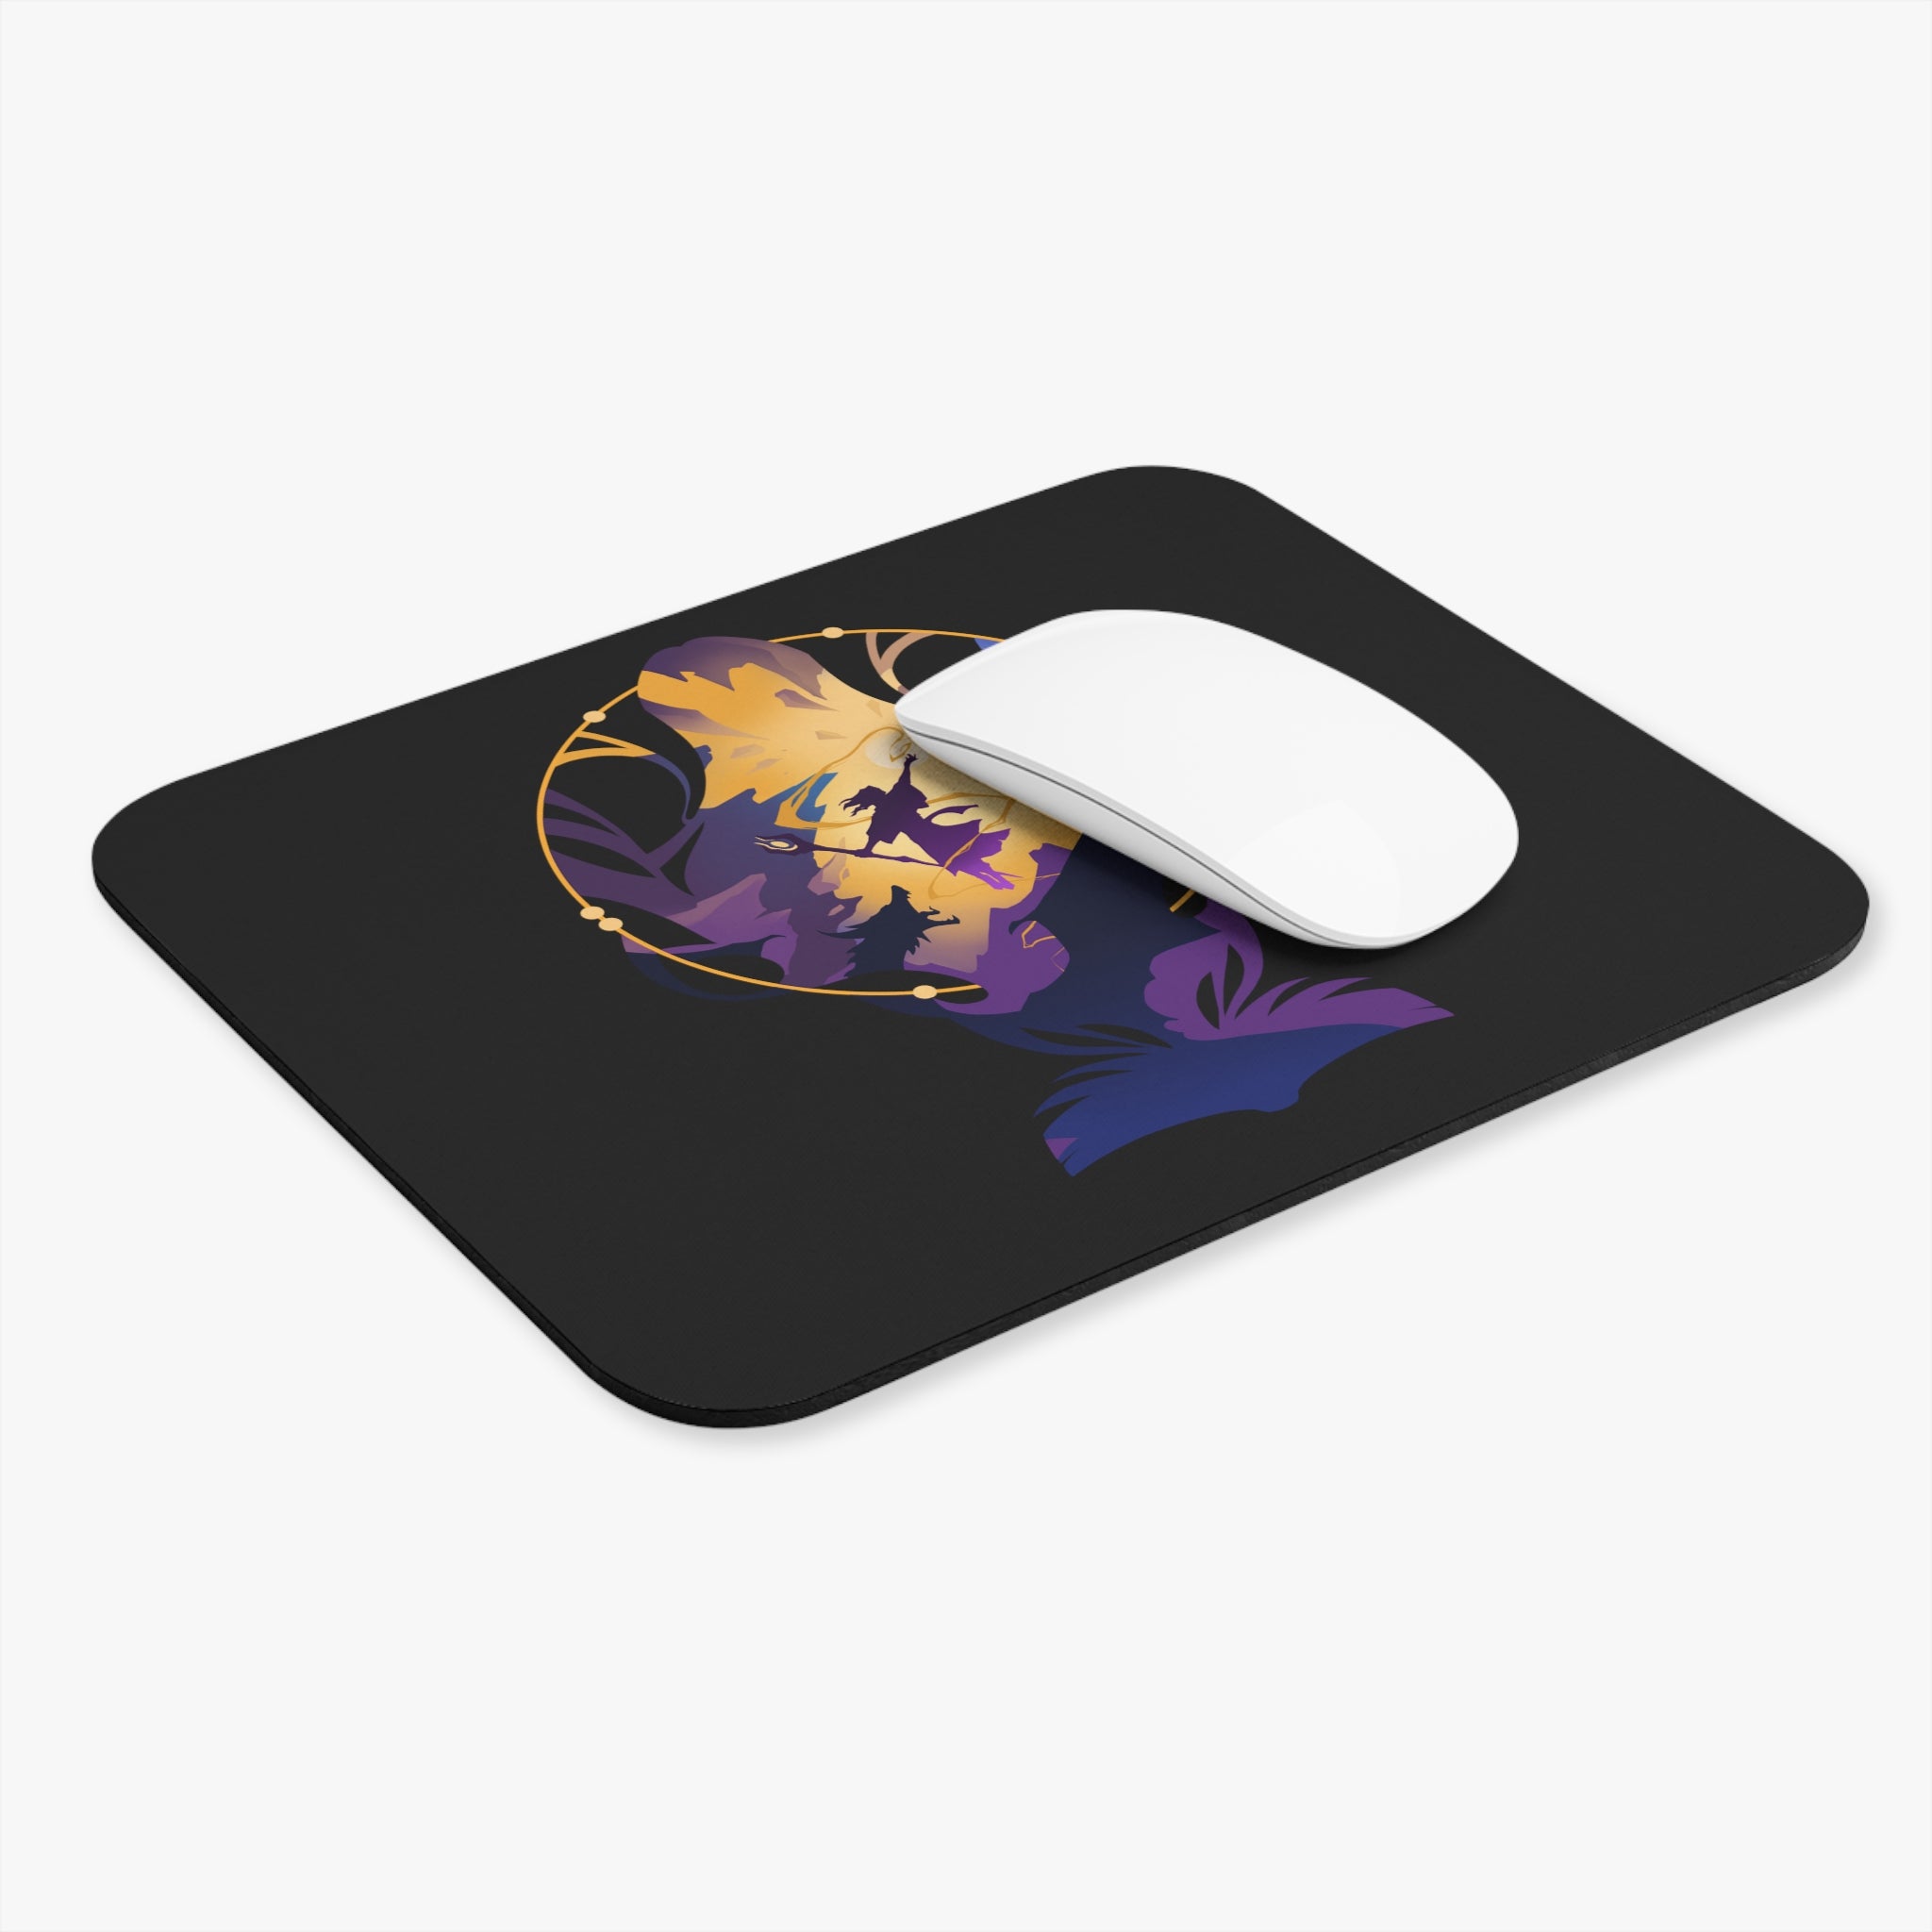 WIZARD CLASS SILHOUETTE RECTANGLER MOUSE PAD